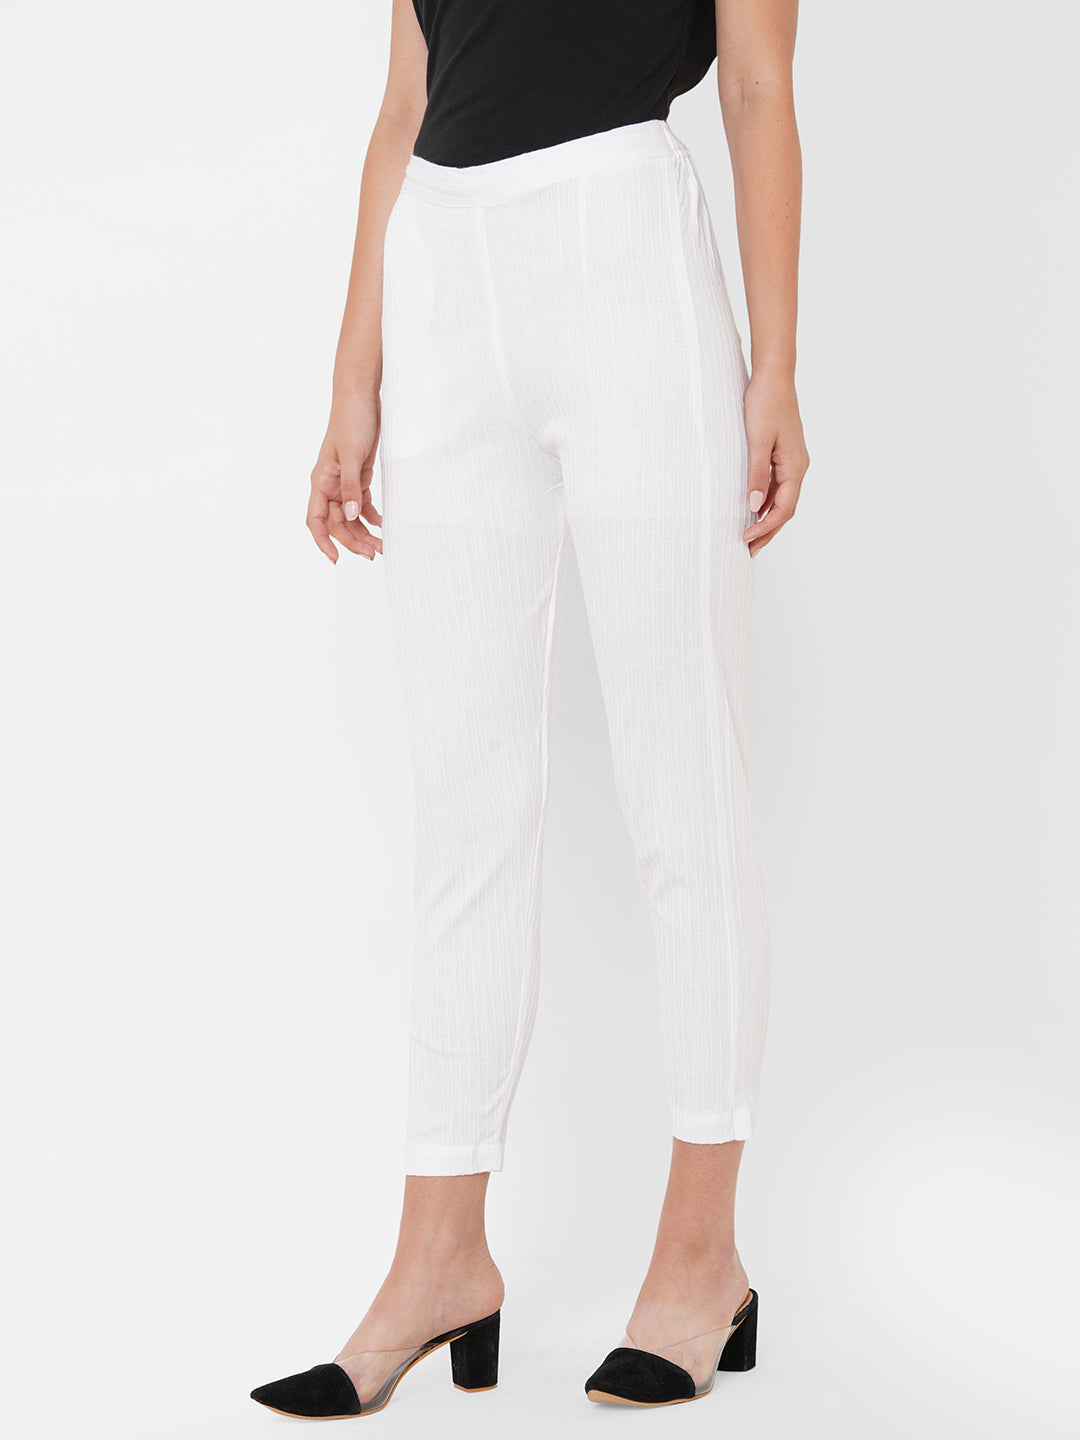 Woven Striped Solid Lycra Pant - White